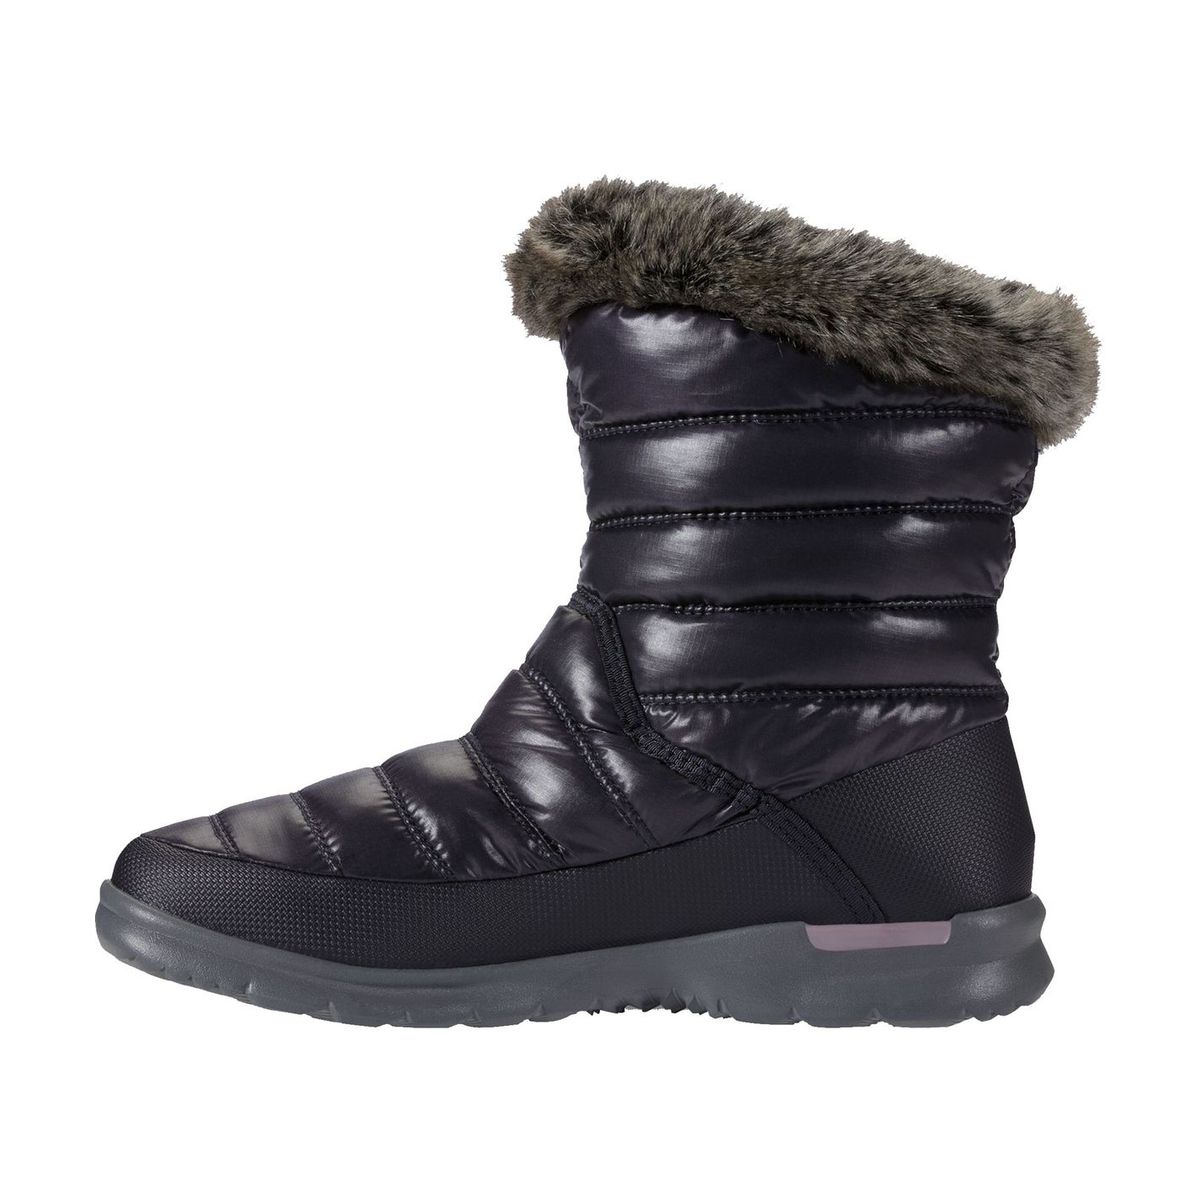 Quilted snow boots